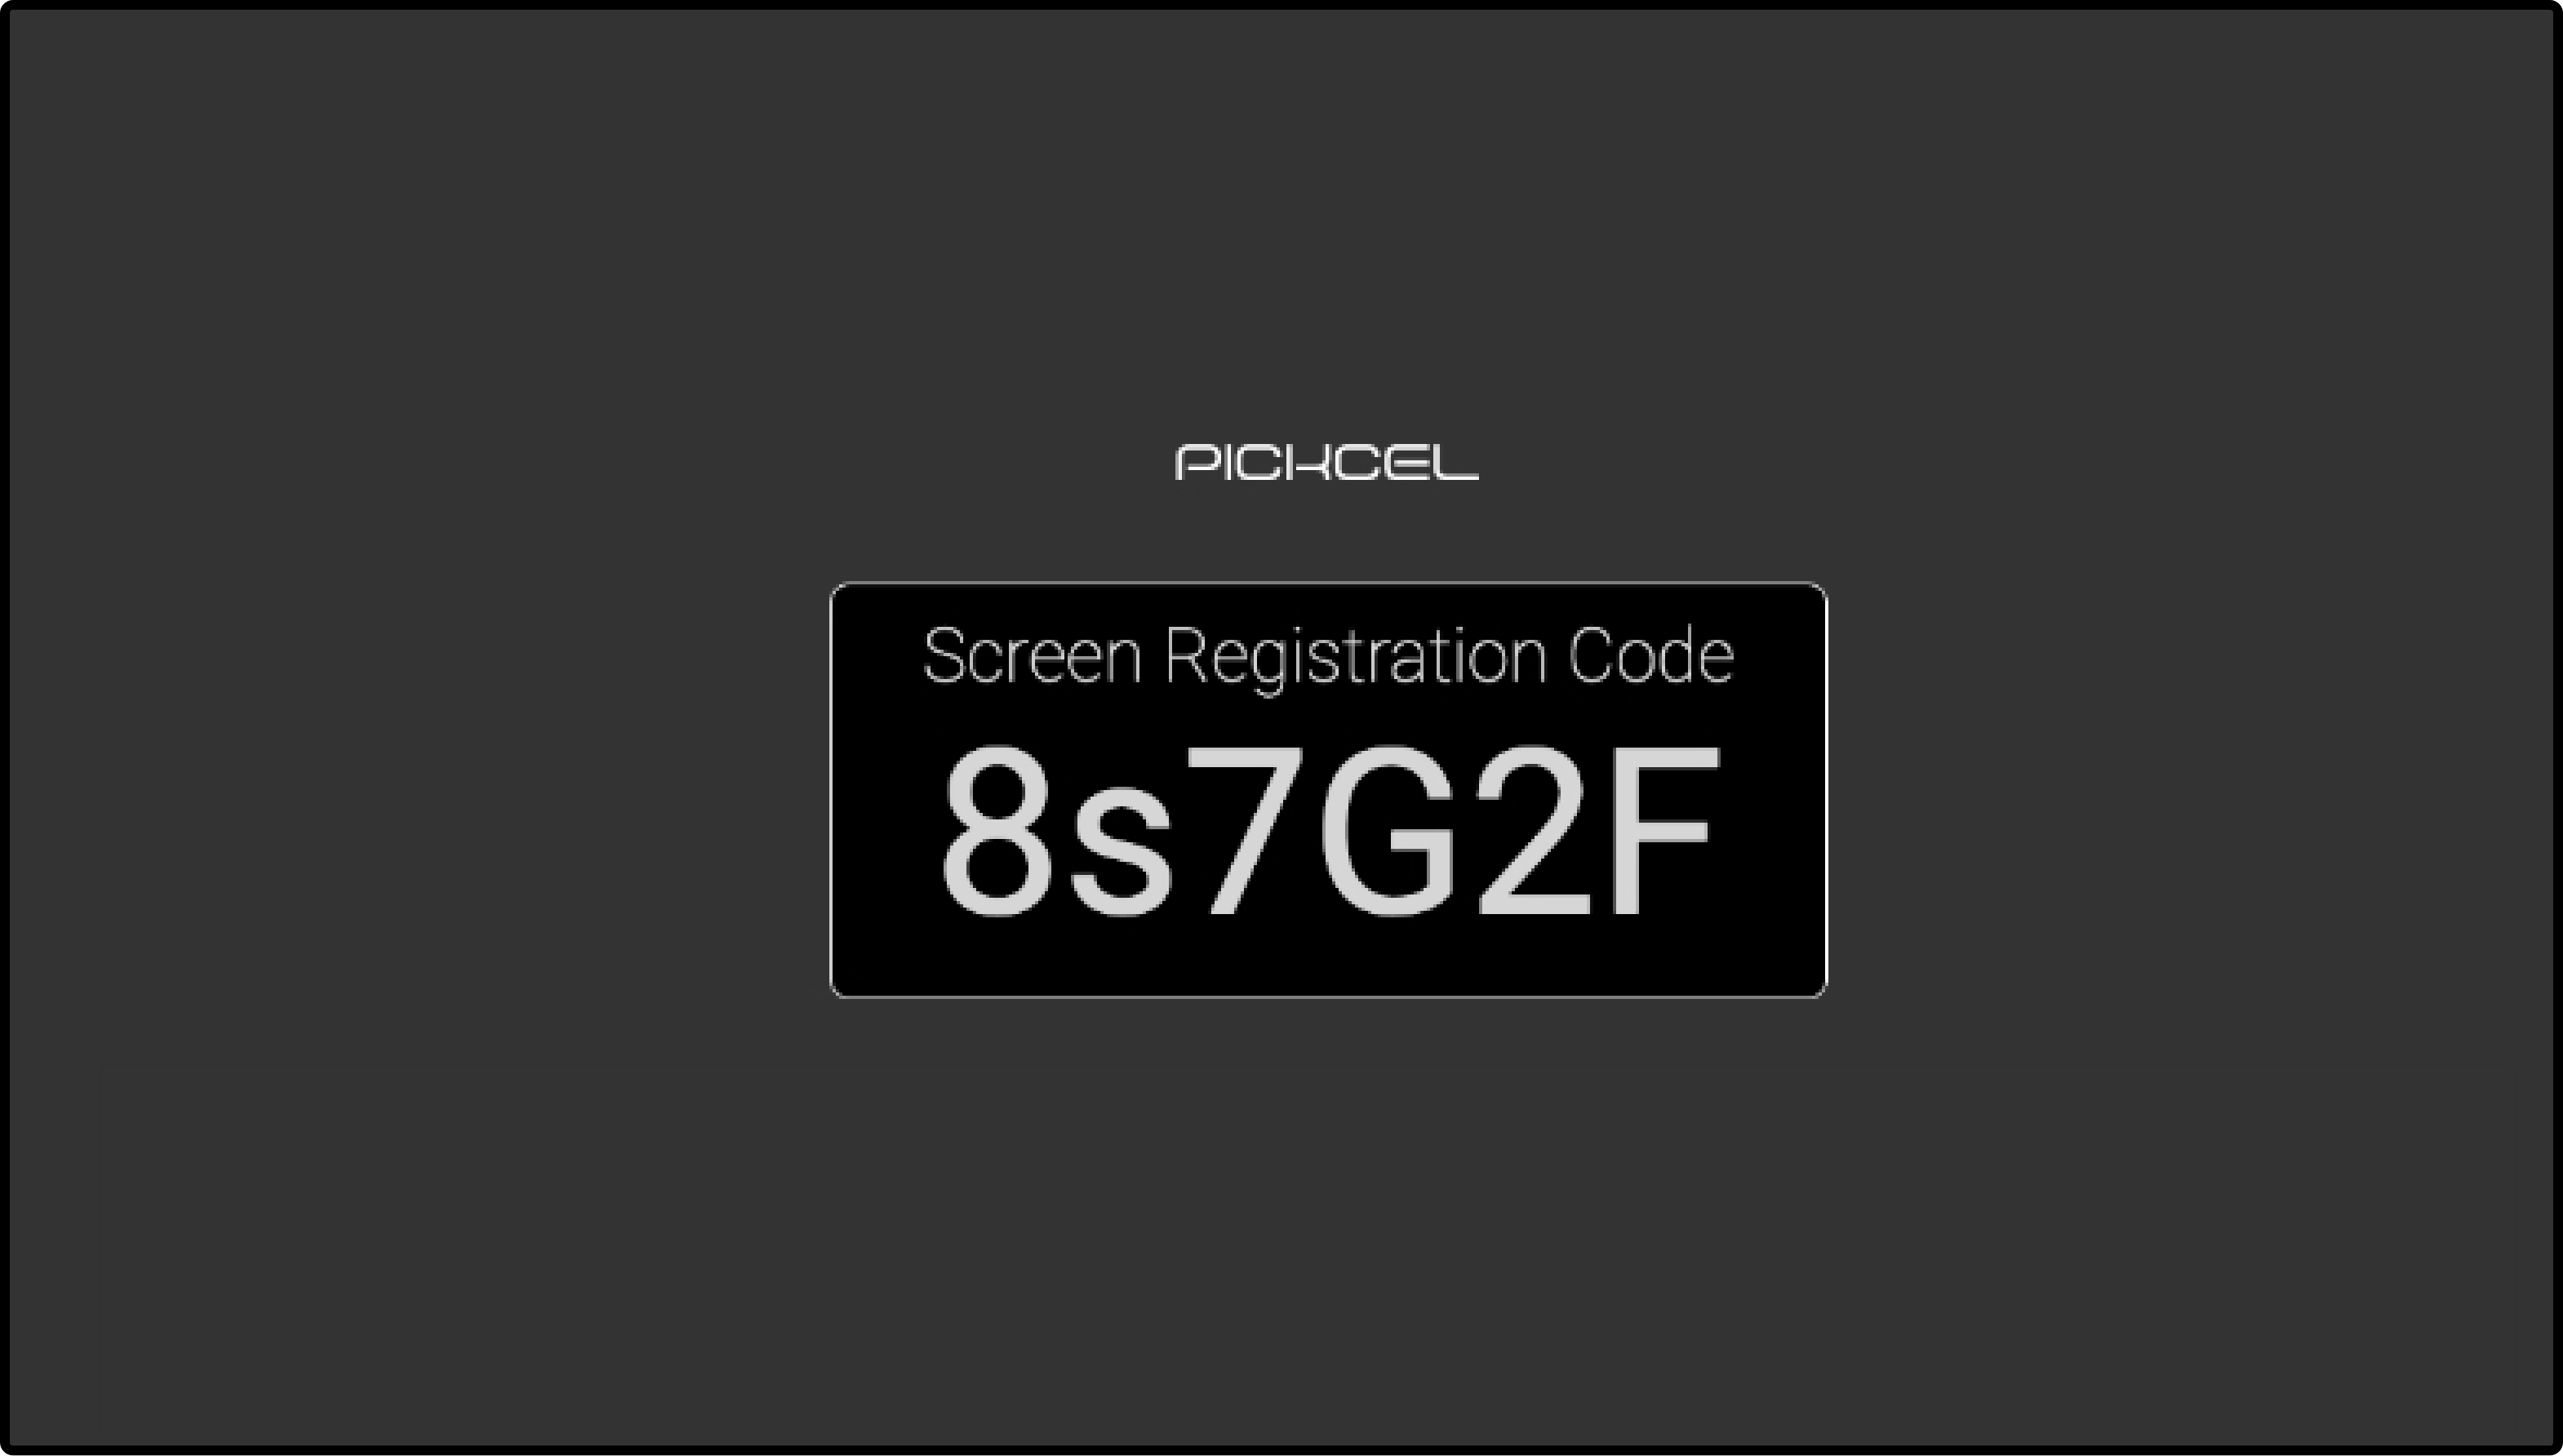 step 2 digital signage software interface showing screen registration code to pair display with the software.